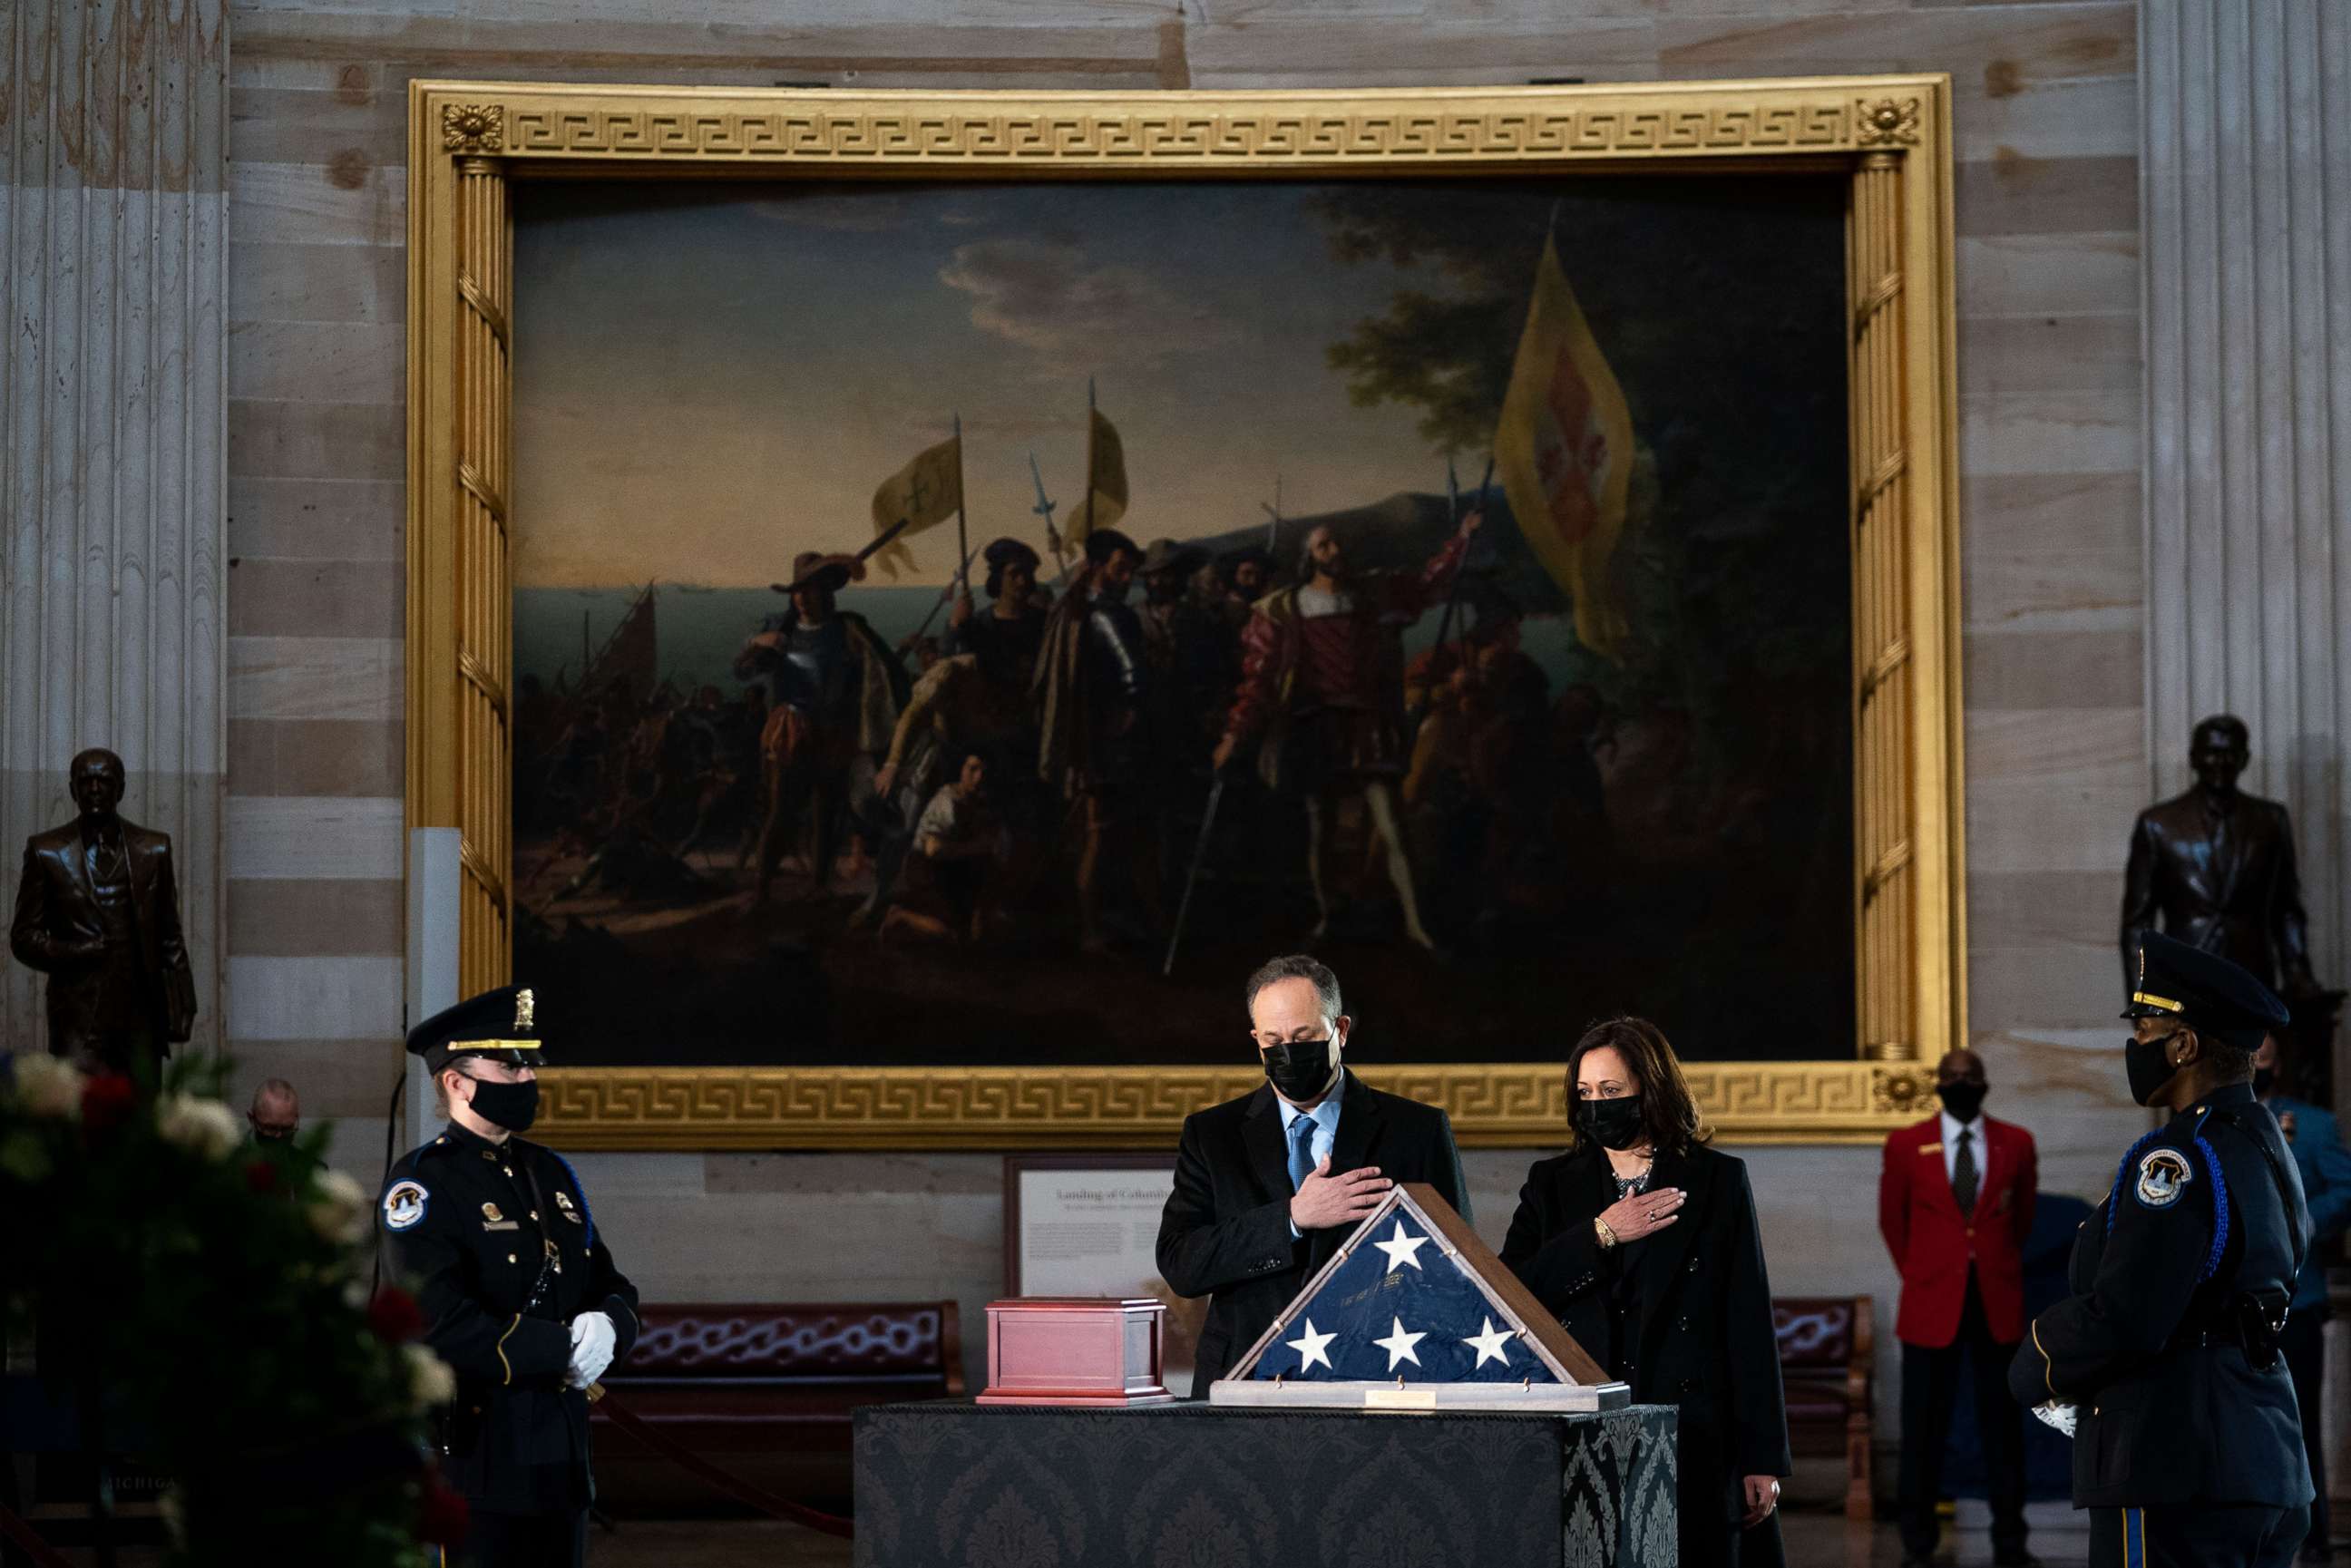 PHOTO: Vice President Kamala Harris and second gentleman Doug Emhoff pay their respects during a ceremony for U.S. Capitol Police Officer Brian D. Sicknick as he lies in honor in the Rotunda of the Capitol on Feb. 3, 2021, in Washington.